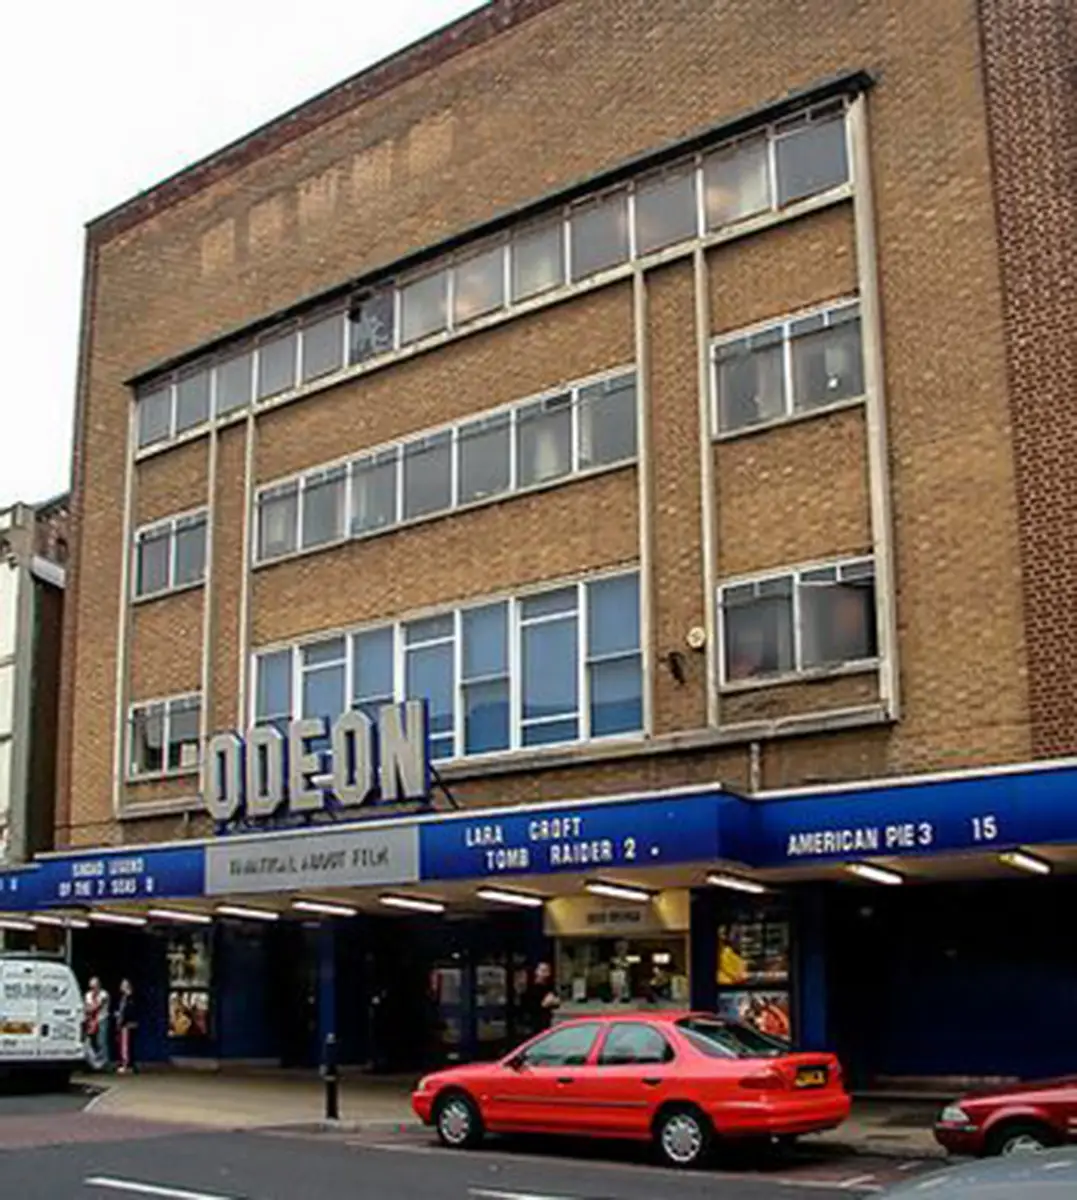 As the Odeon